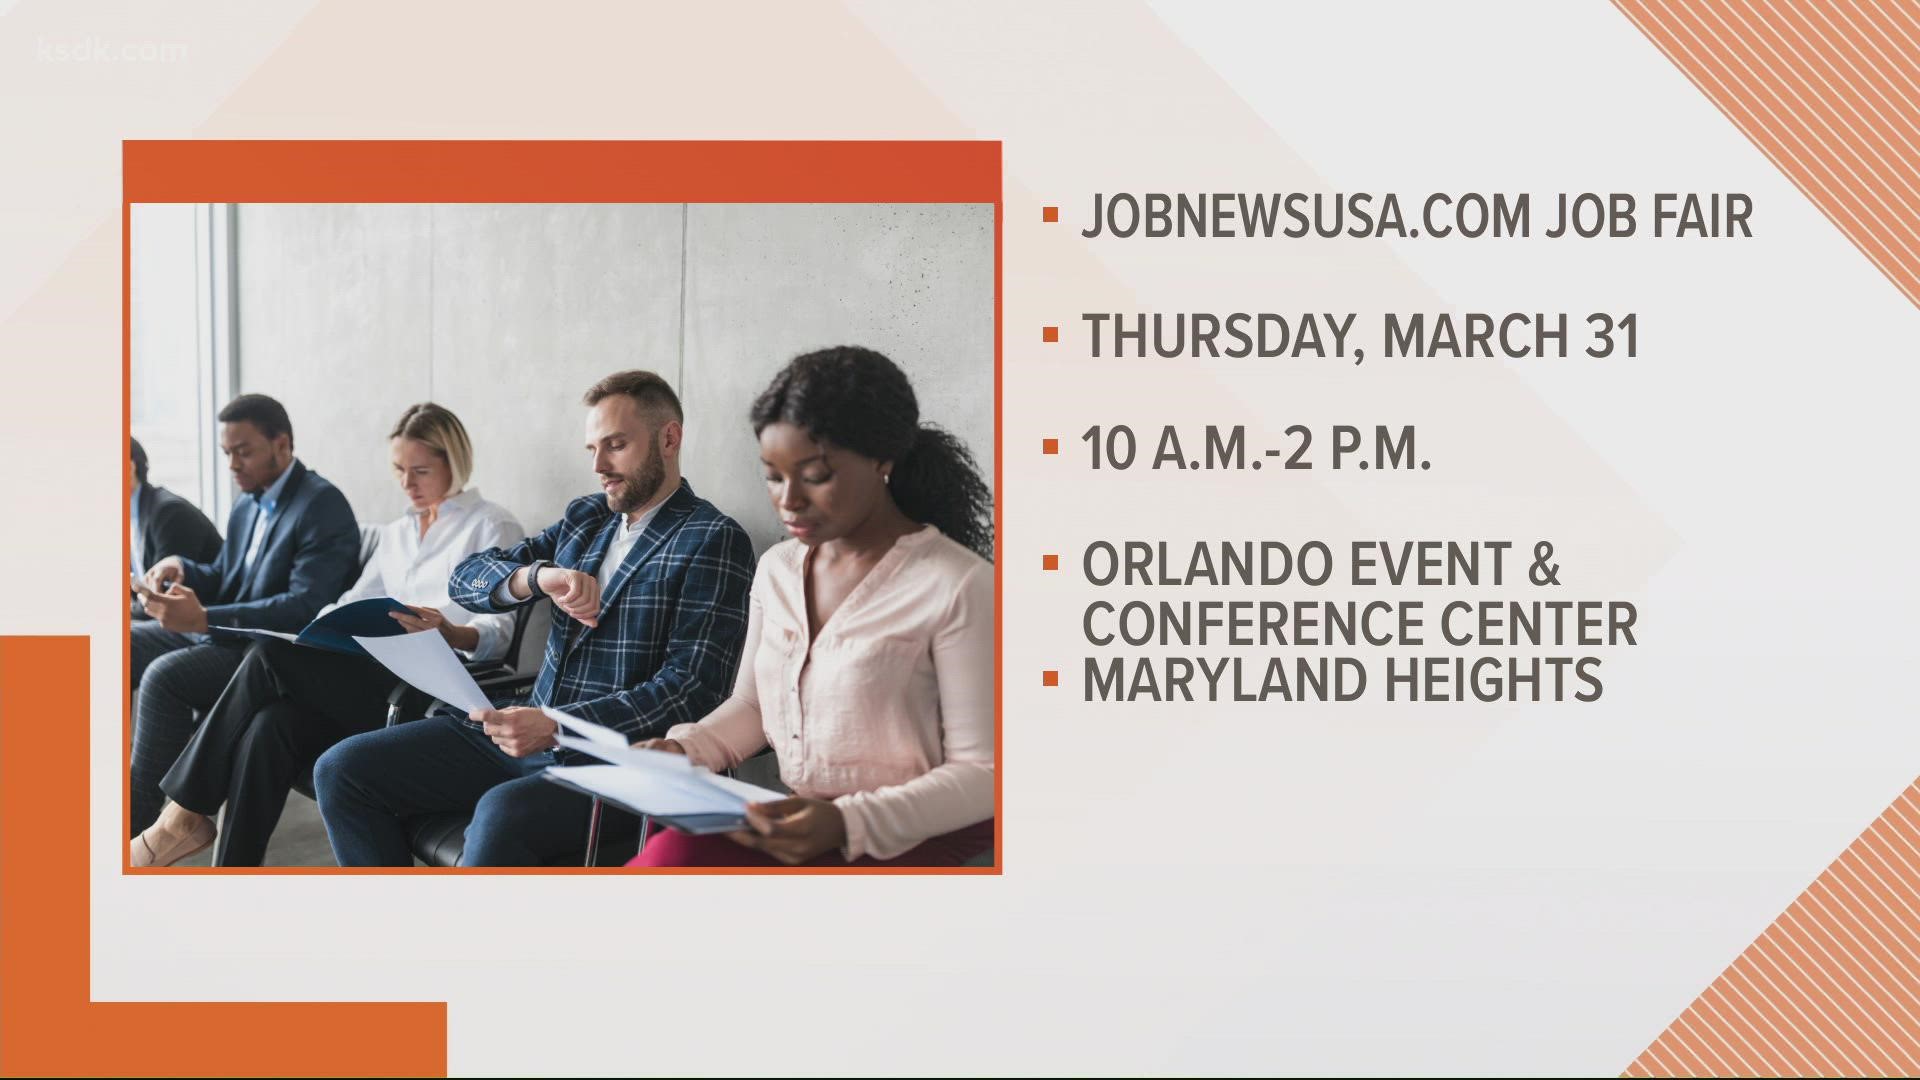 Looking for a new job? There are several job fairs happening this week.